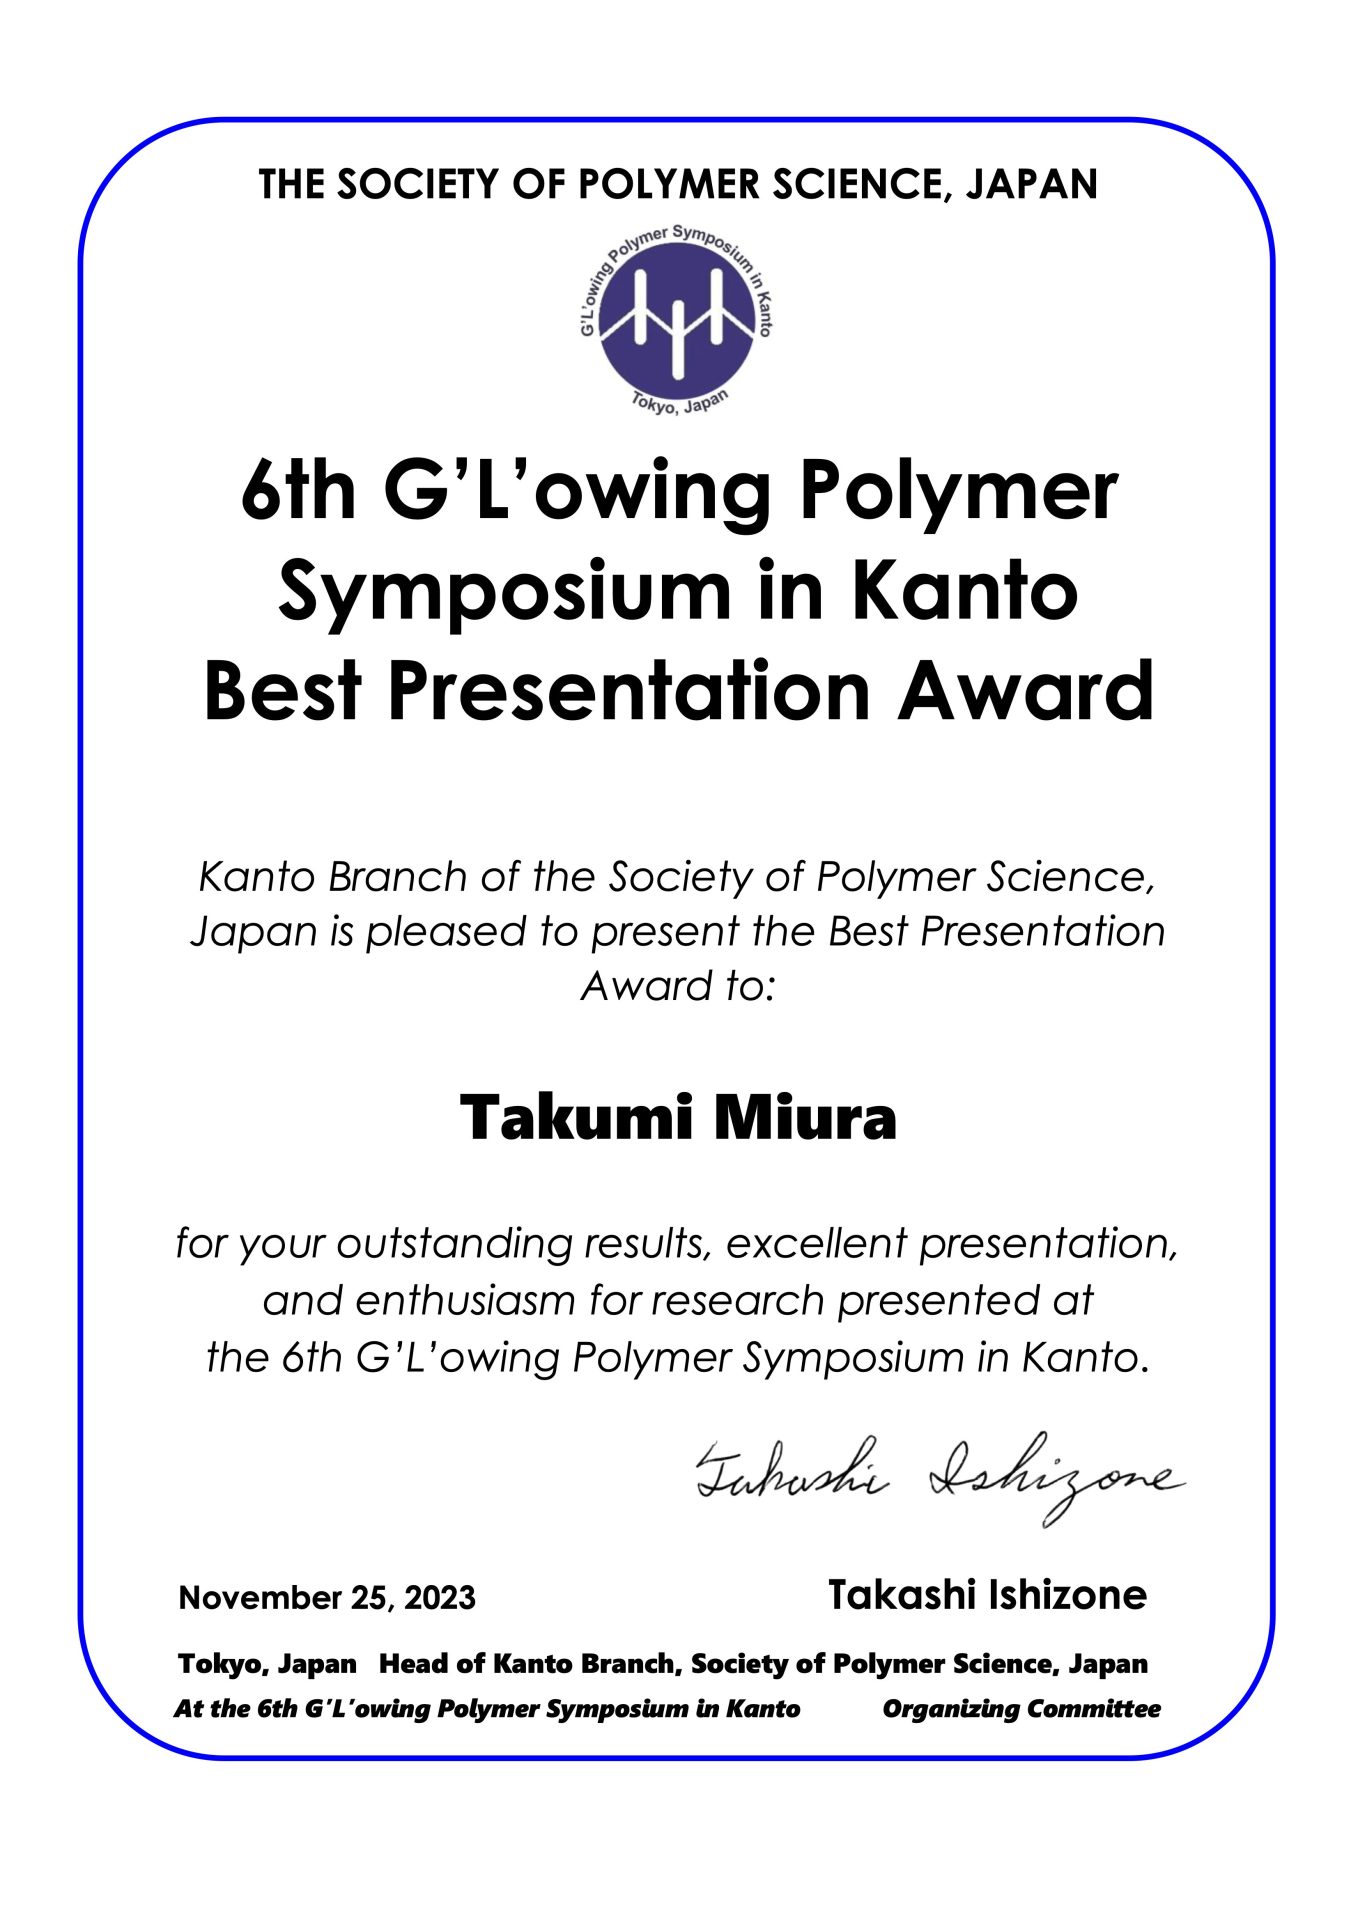 The oral presentation award at the 6th G’L’owing Polymer Symposium in KANTO